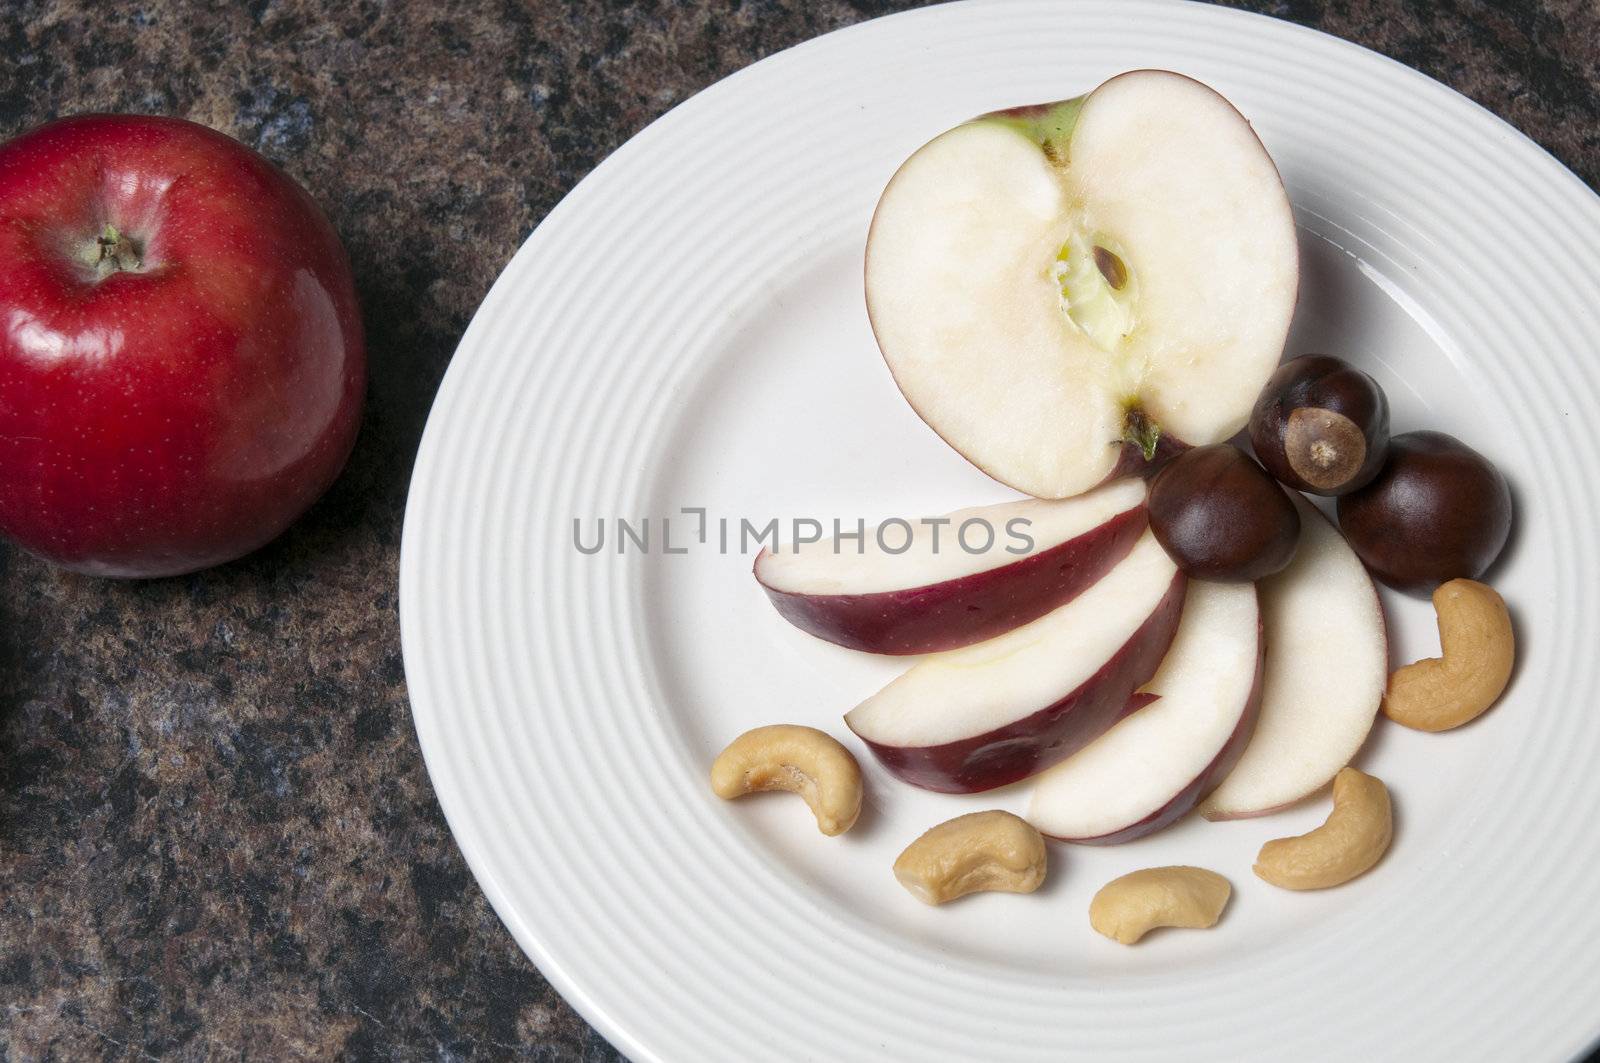 Arrangement of apples and nuts on a white plate